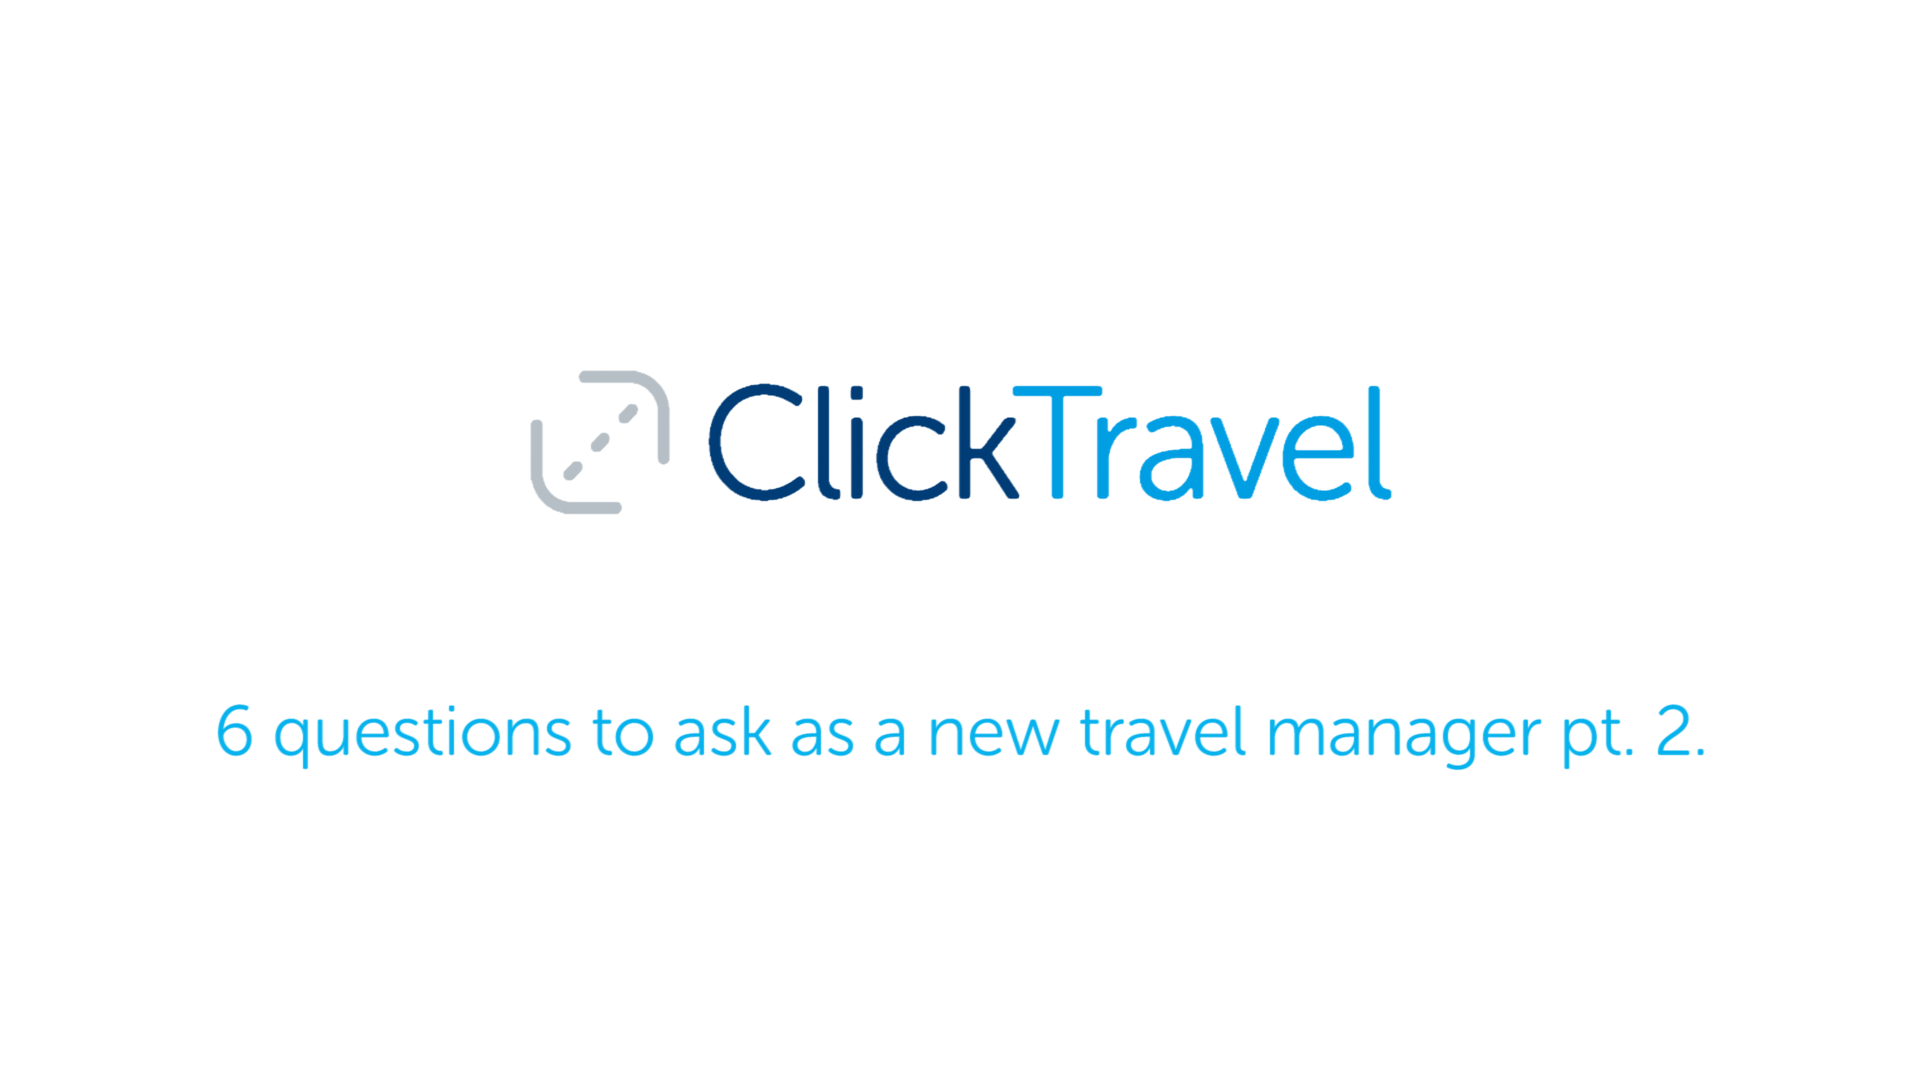 [VIDEO] 6 questions to ask as a new Travel Manager (pt 2)